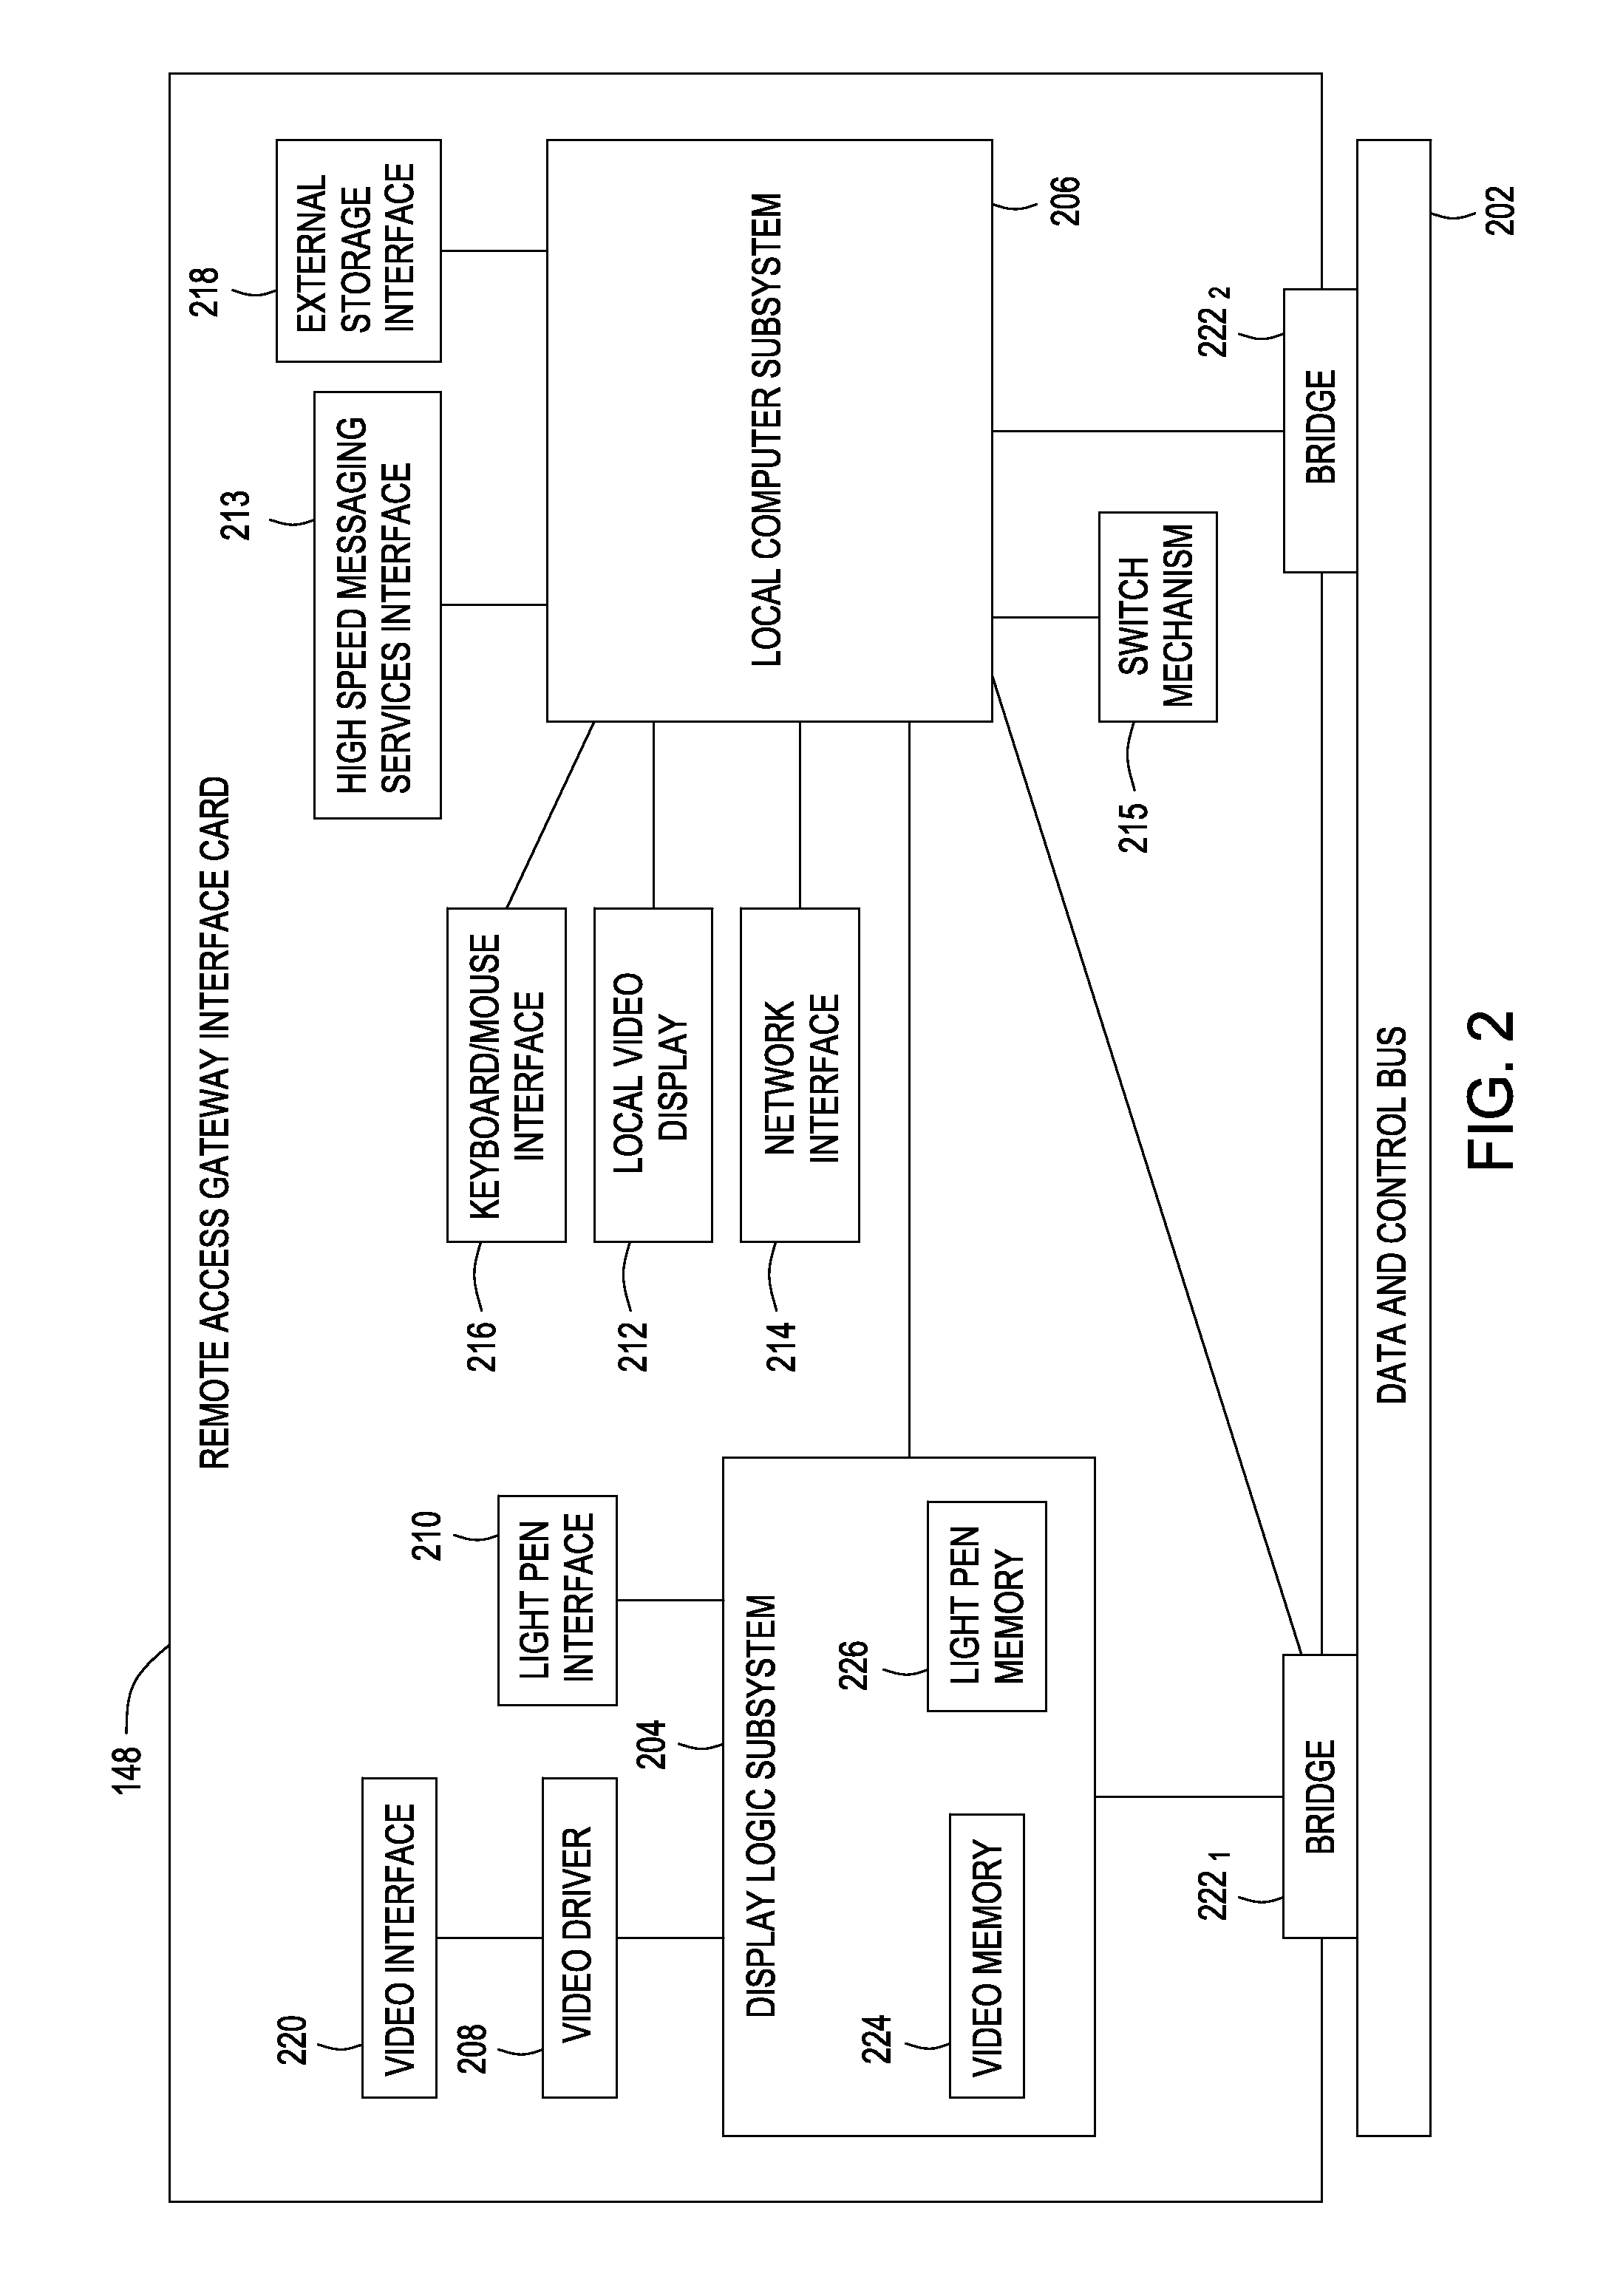 Remote access gateway for semiconductor processing equipment